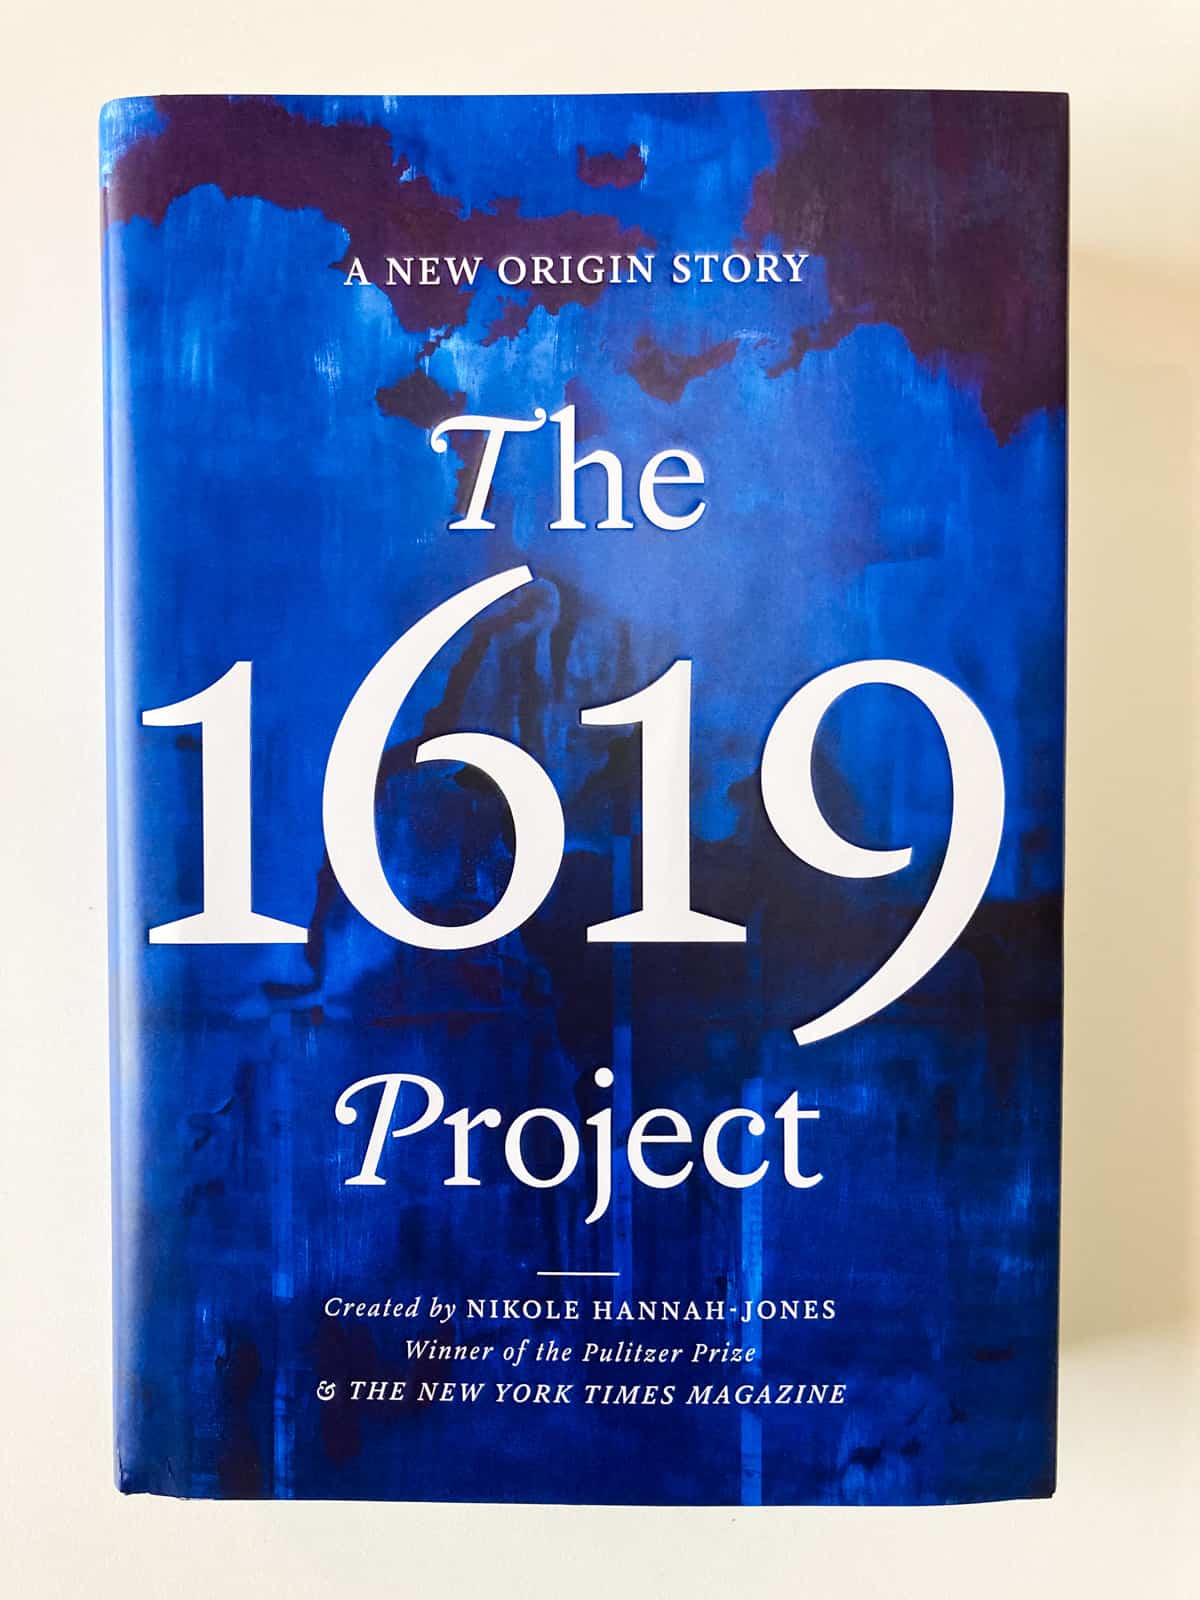 Cover of The 1619 Project, created by Nikole Hannah-Jones